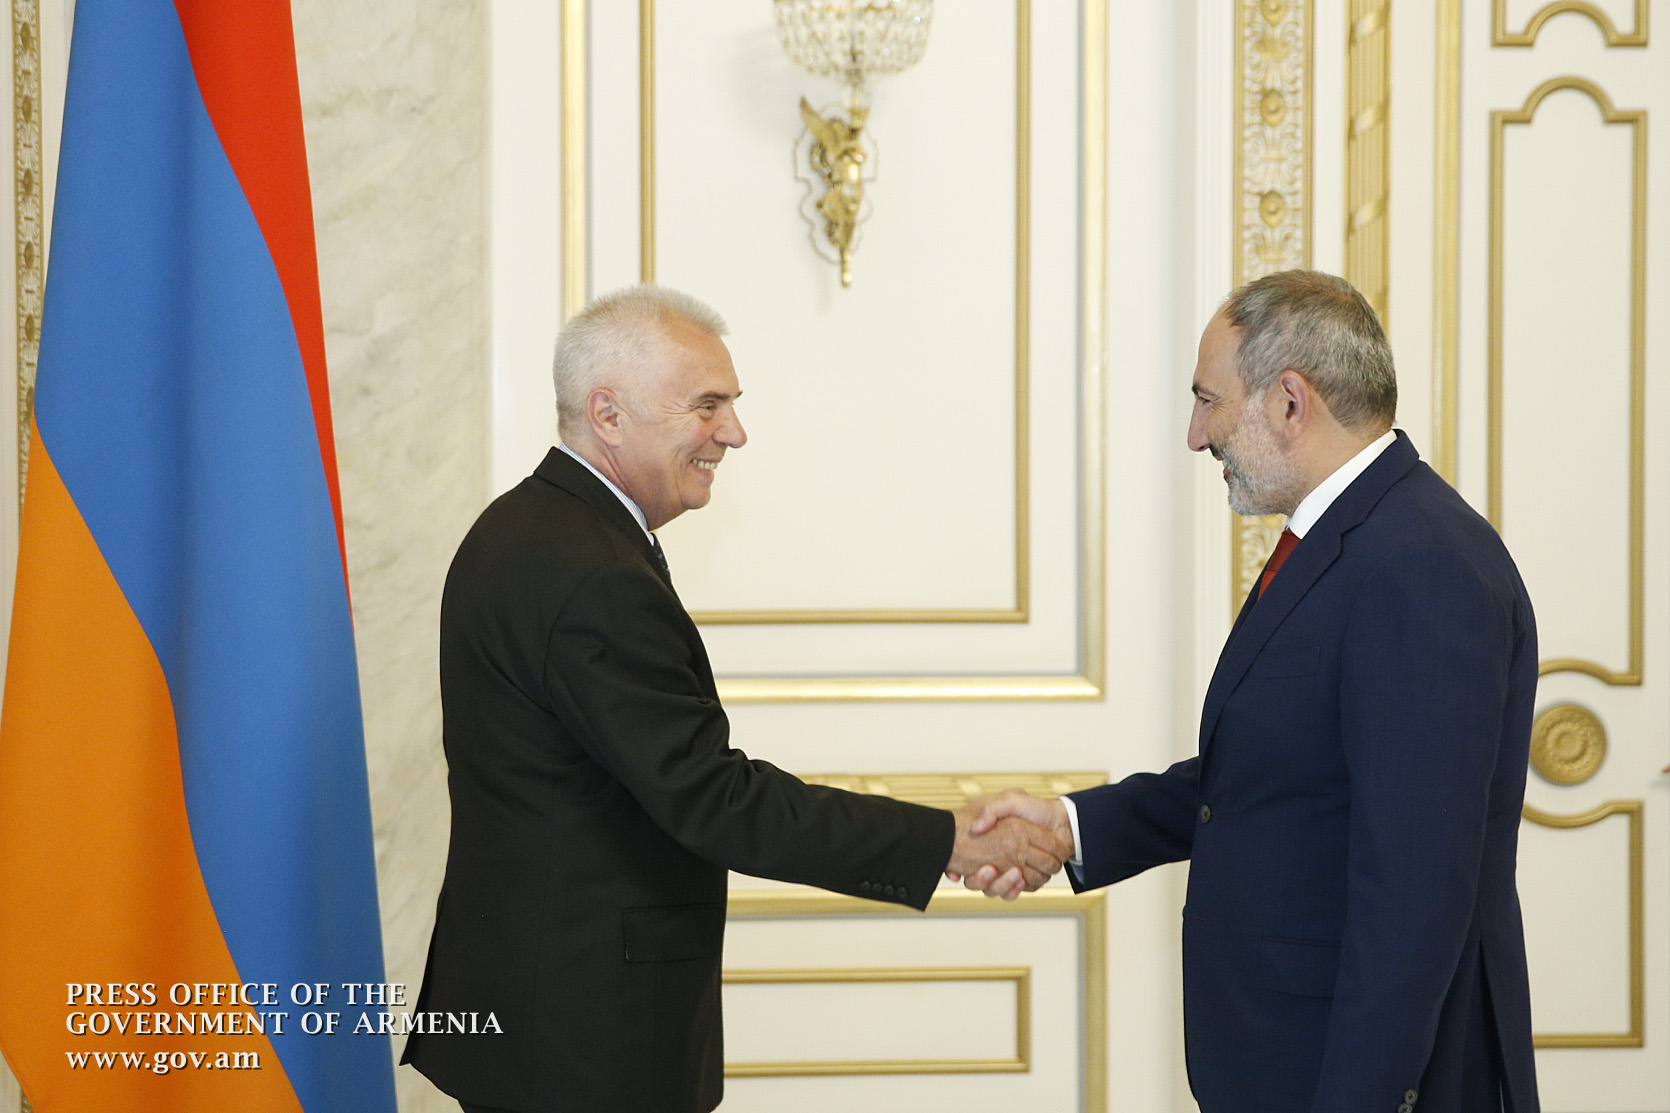 “We consider you the friend of democracy in Armenia” – PM holds farewell meeting with Piotr Switalski